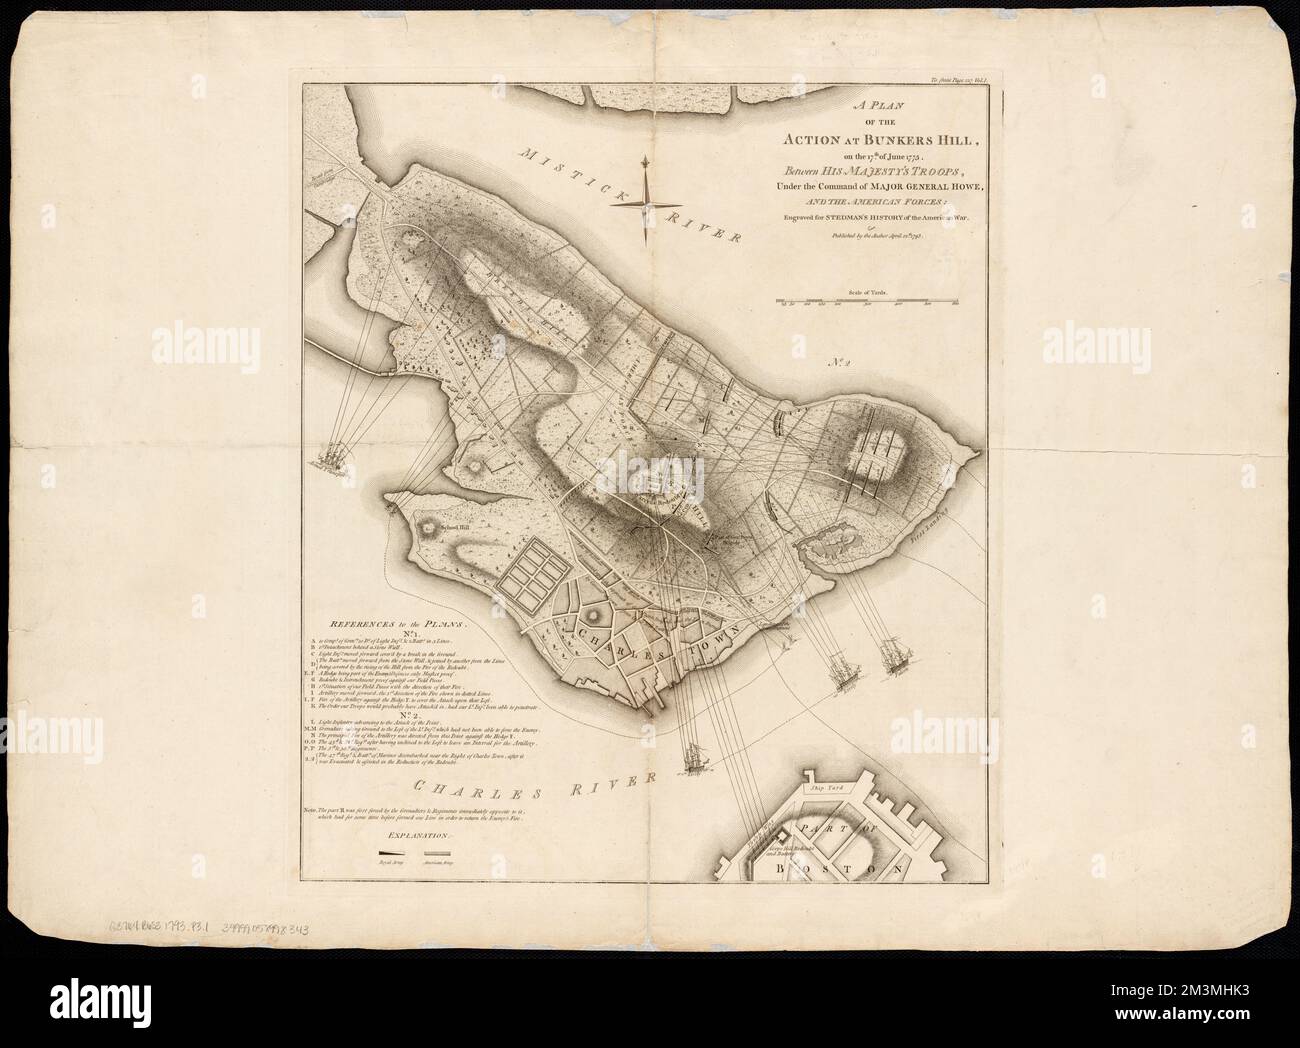 A plan of the action at Bunkers Hill on the 17th of June 1775 between His Majesty's troops, under the command of Major General Howe, and the American forces , Bunker Hill, Battle of, Boston, Mass., 1775, Maps, Early works to 1800, Boston Mass., History, Revolution, 1775-1783, Maps, Early works to 1800 Norman B. Leventhal Map Center Collection Stock Photo